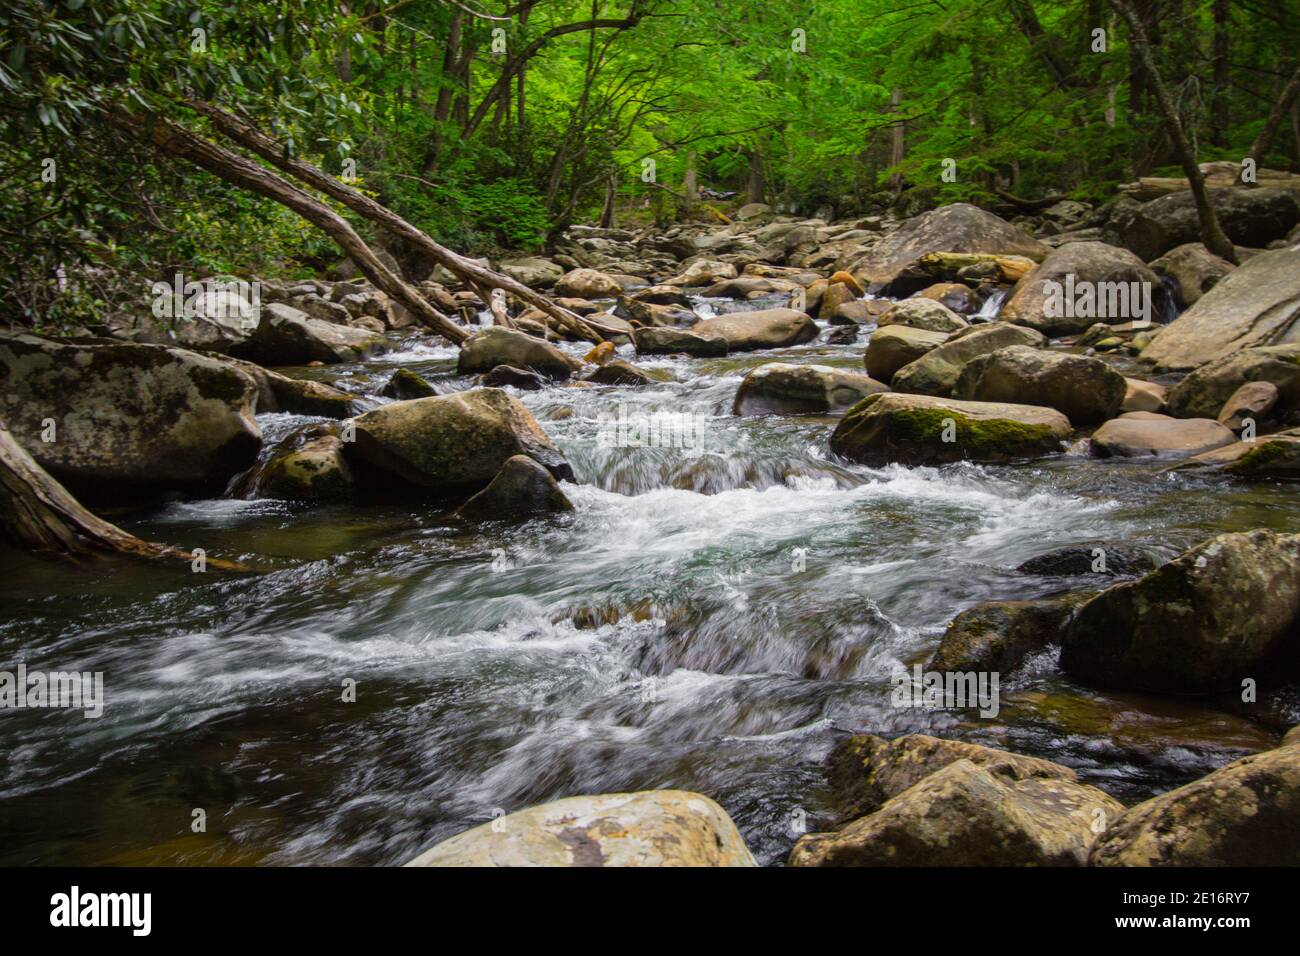 Great Smoky Mountains In The Spring. Rushing river surrounded by lush foliage during springtime in the Great Smoky Mountains National Park in Tennessee. Stock Photo